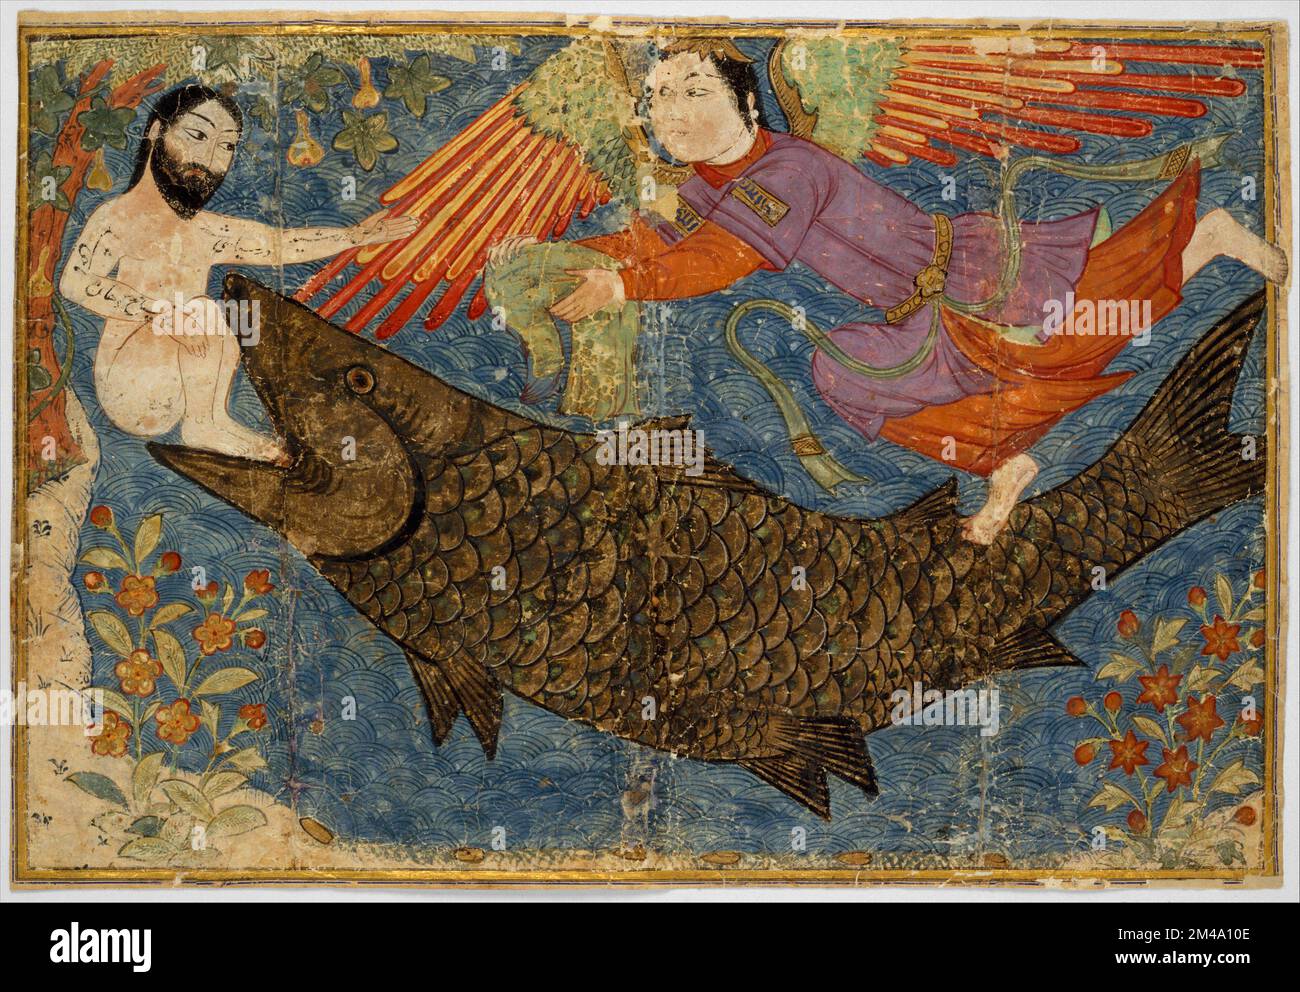 Iran / Persia: Jonah rescued from the belly of the whale, helped by an angel. Folio from a copy of the Jami al-Tawarikh (Compendium of Chronicles) by Rashid al-Din Hamadani (1247-1318), c. 1400. Jonah is the name given in the Hebrew Bible (Tanakh/Old Testament) to a prophet of the northern kingdom of Israel in about the 8th century BCE, the eponymous central character in the Book of Jonah, famous for being swallowed by a fish or a whale, depending on translation. The Biblical story of Jonah is repeated in the Qur'an, where Jonah is identified as Yunus or Yunan. Stock Photo